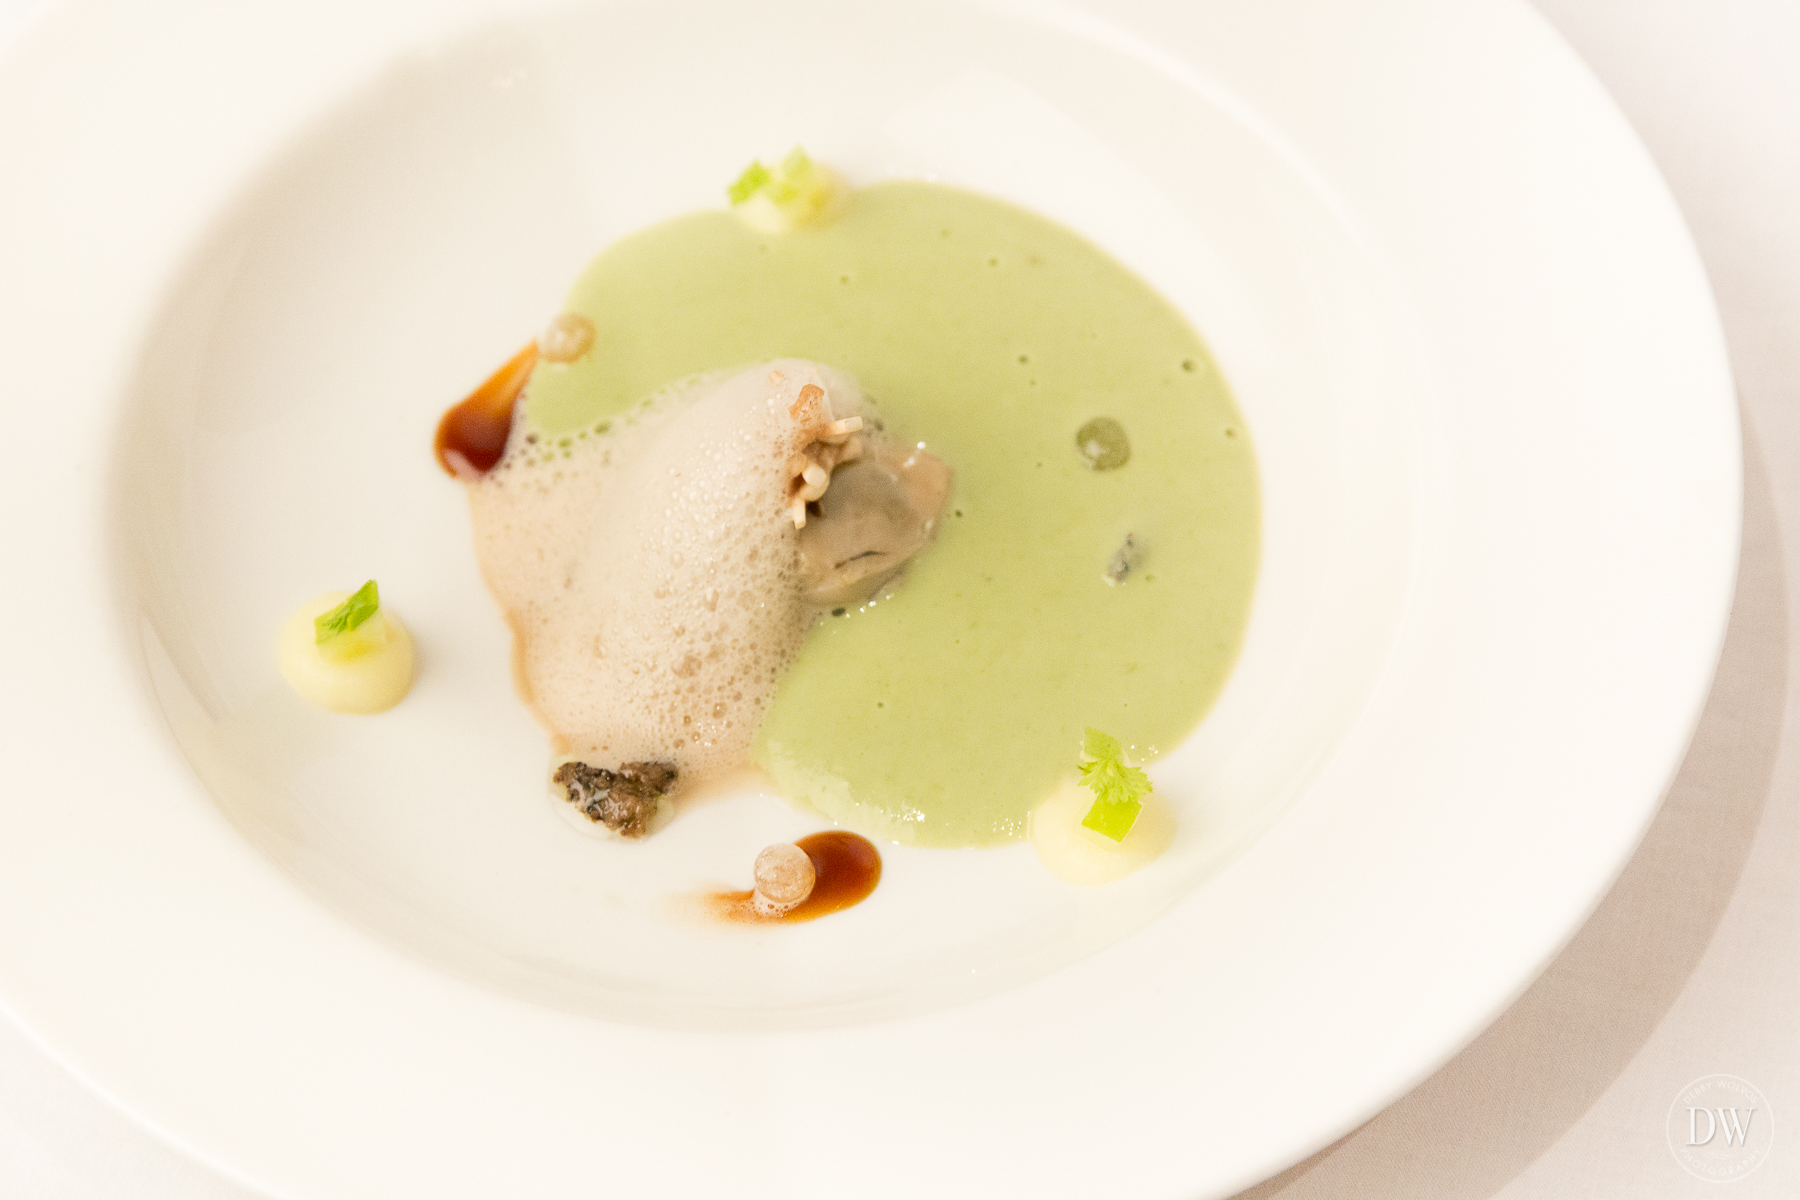 Oyster with iodine sauce, green apple and mushroom foam